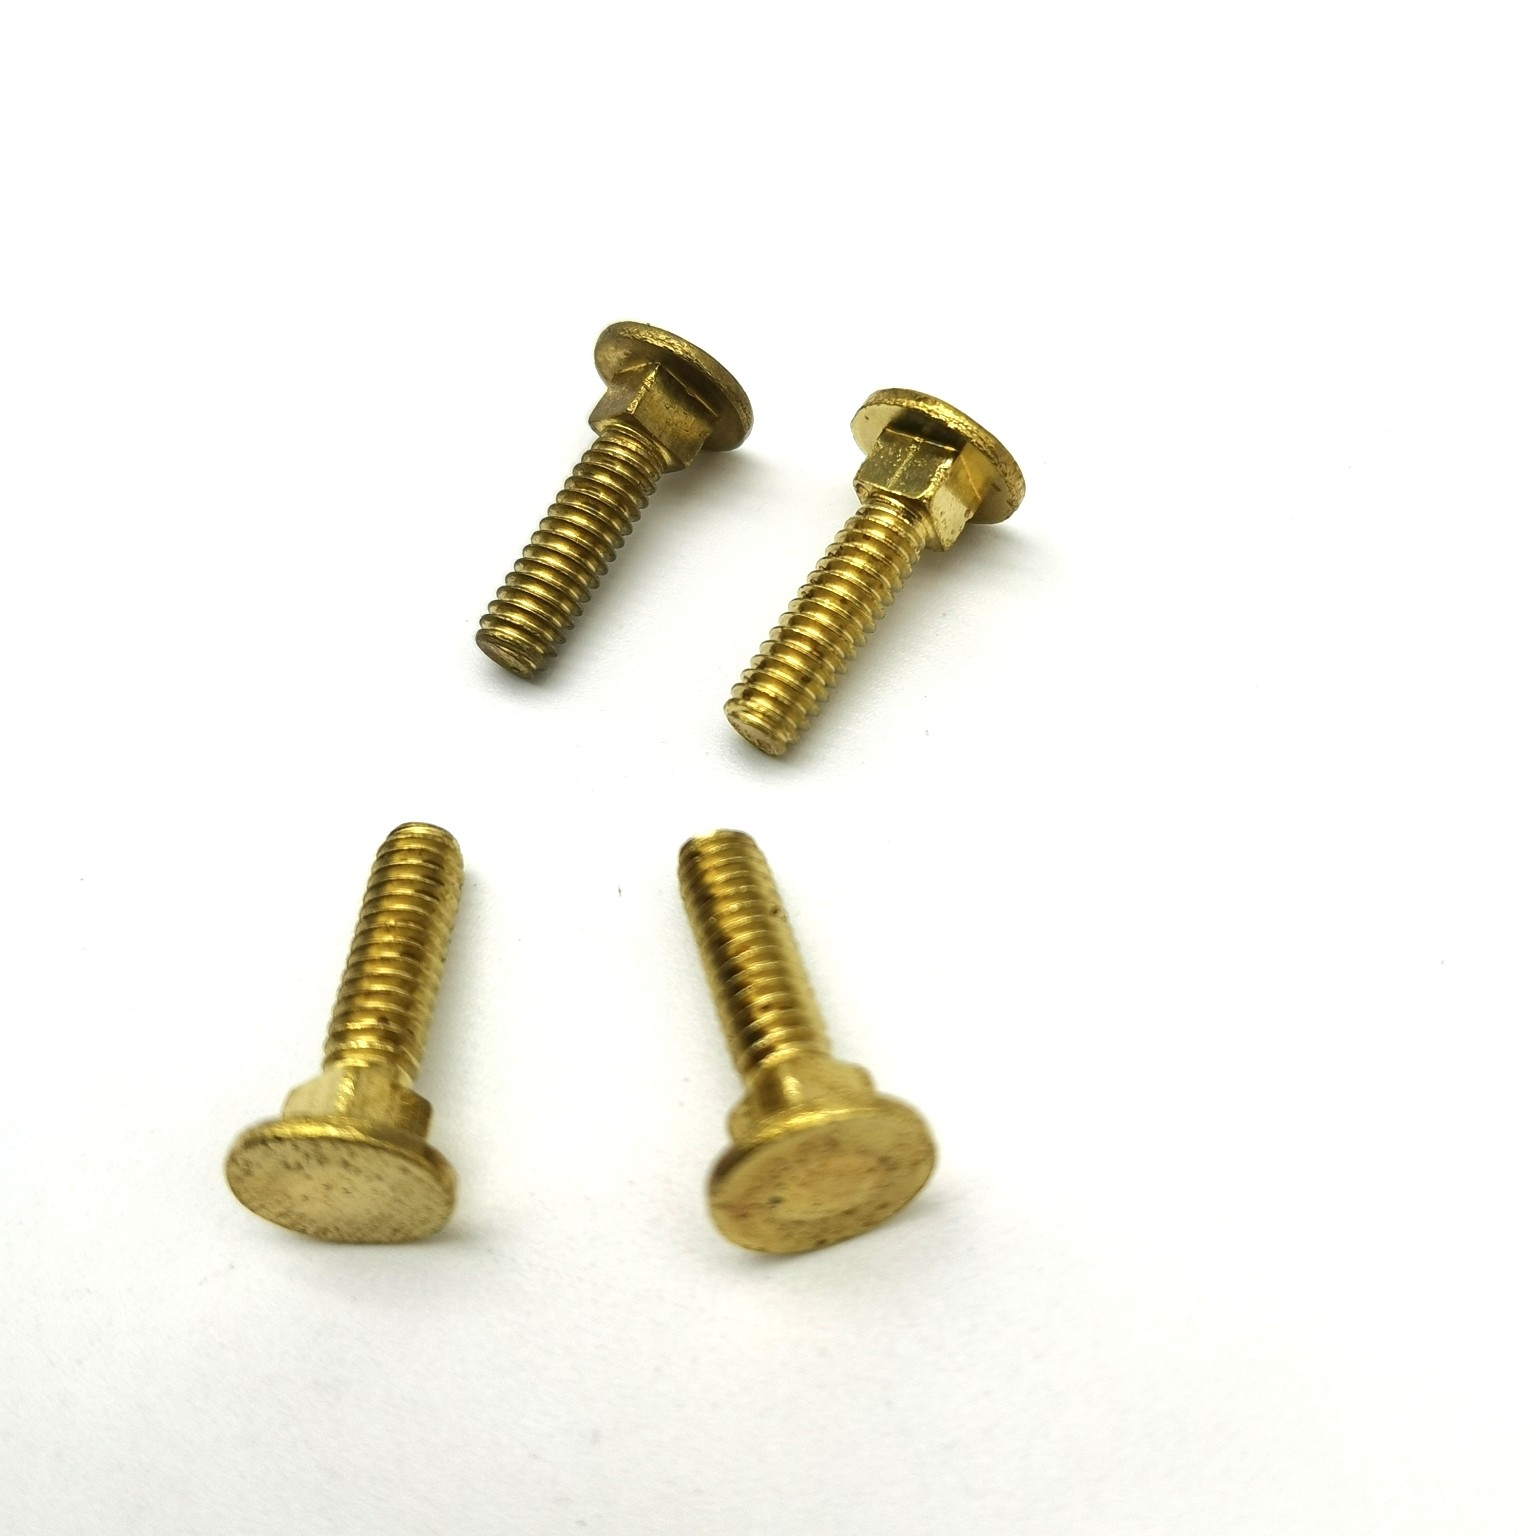 Square-Necked Flat-Head Copper Screw For Battery Conduction 